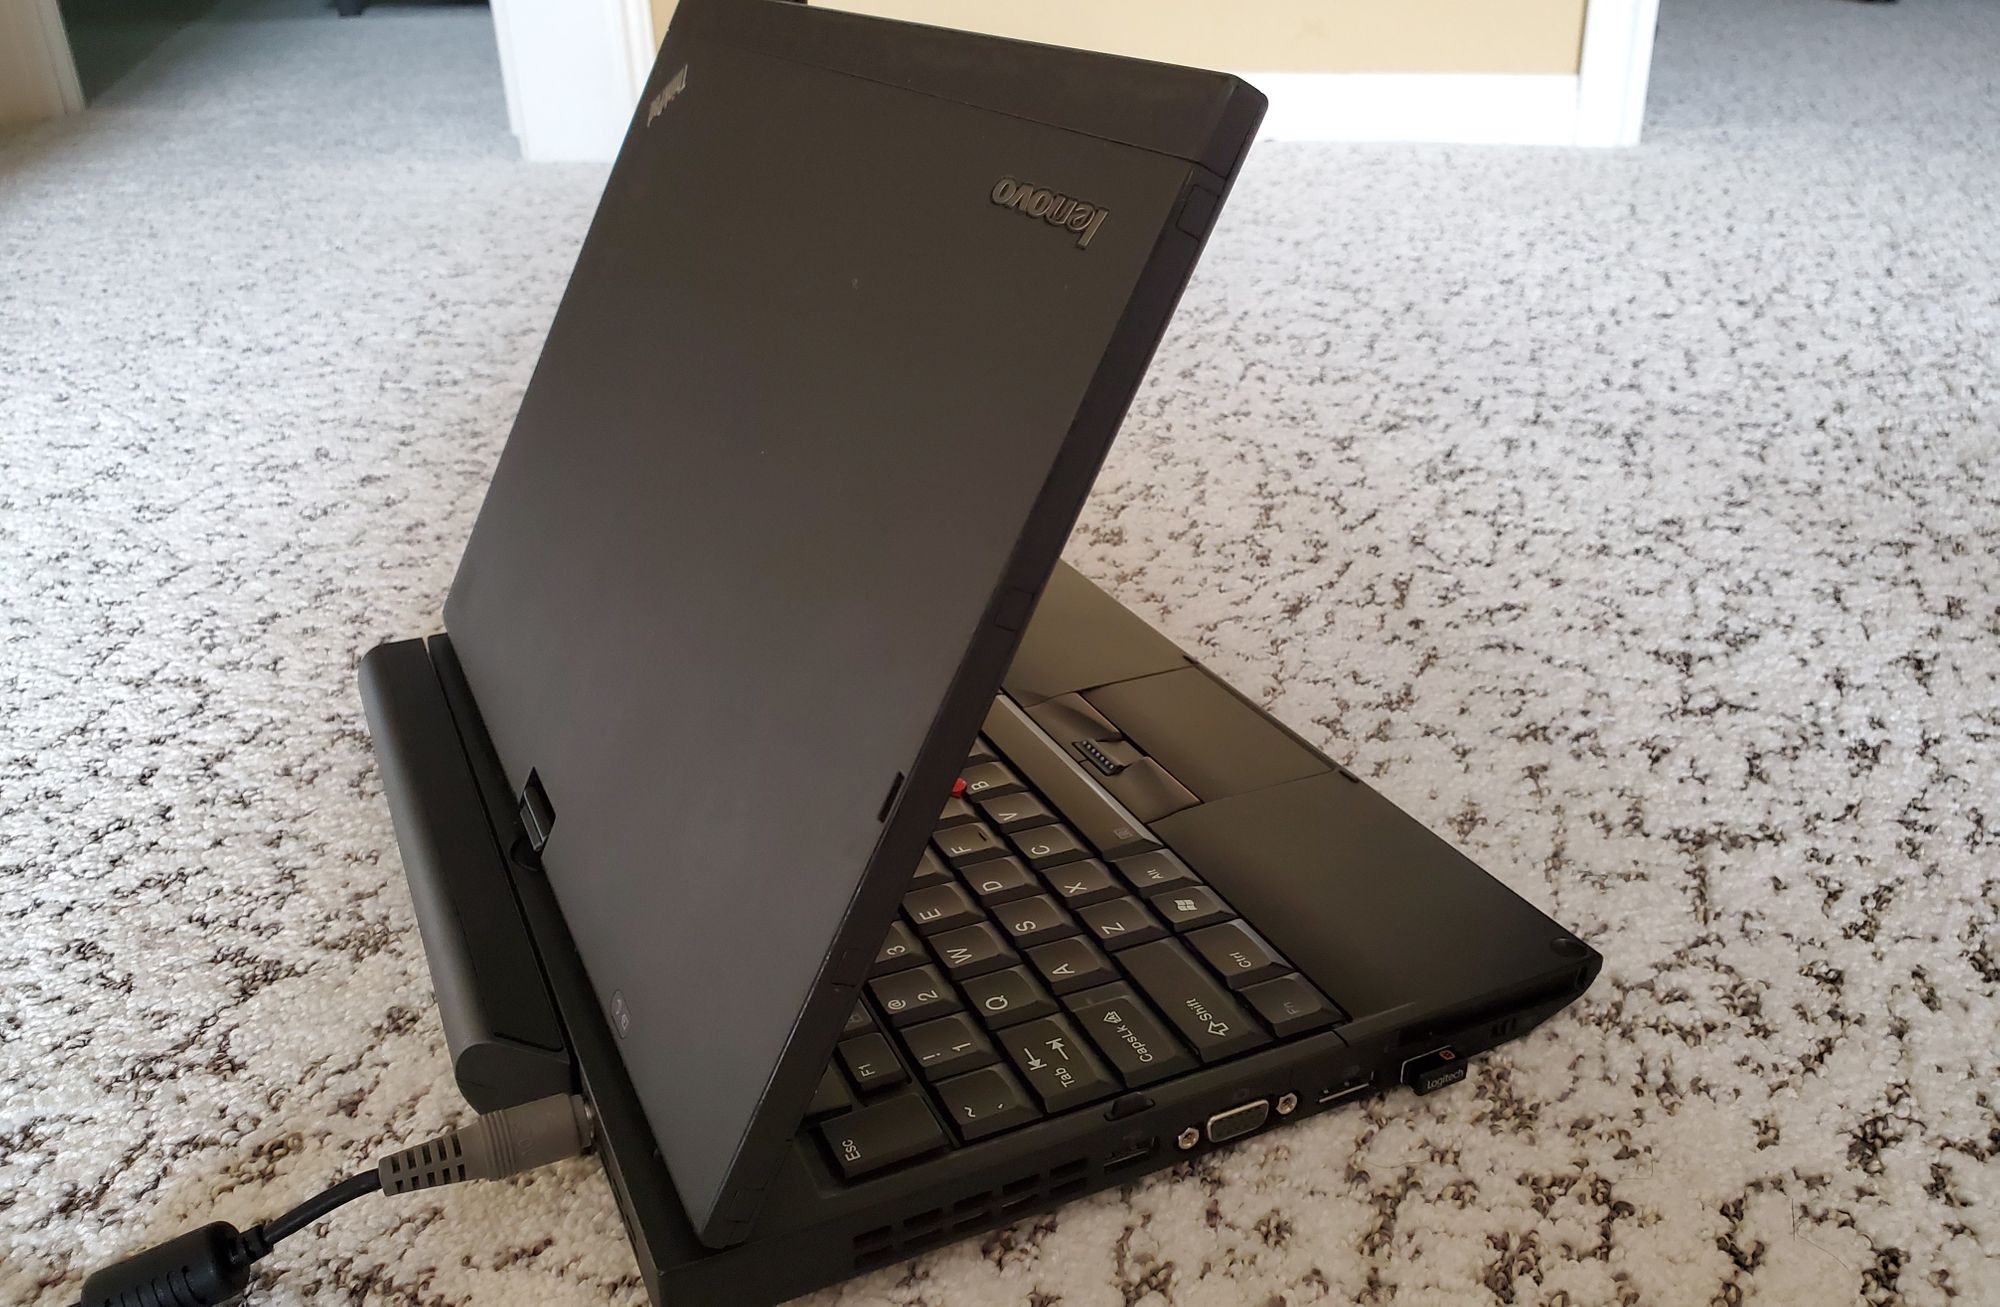 Adventures in buying & upgrading a Thinkpad X220 Tablet